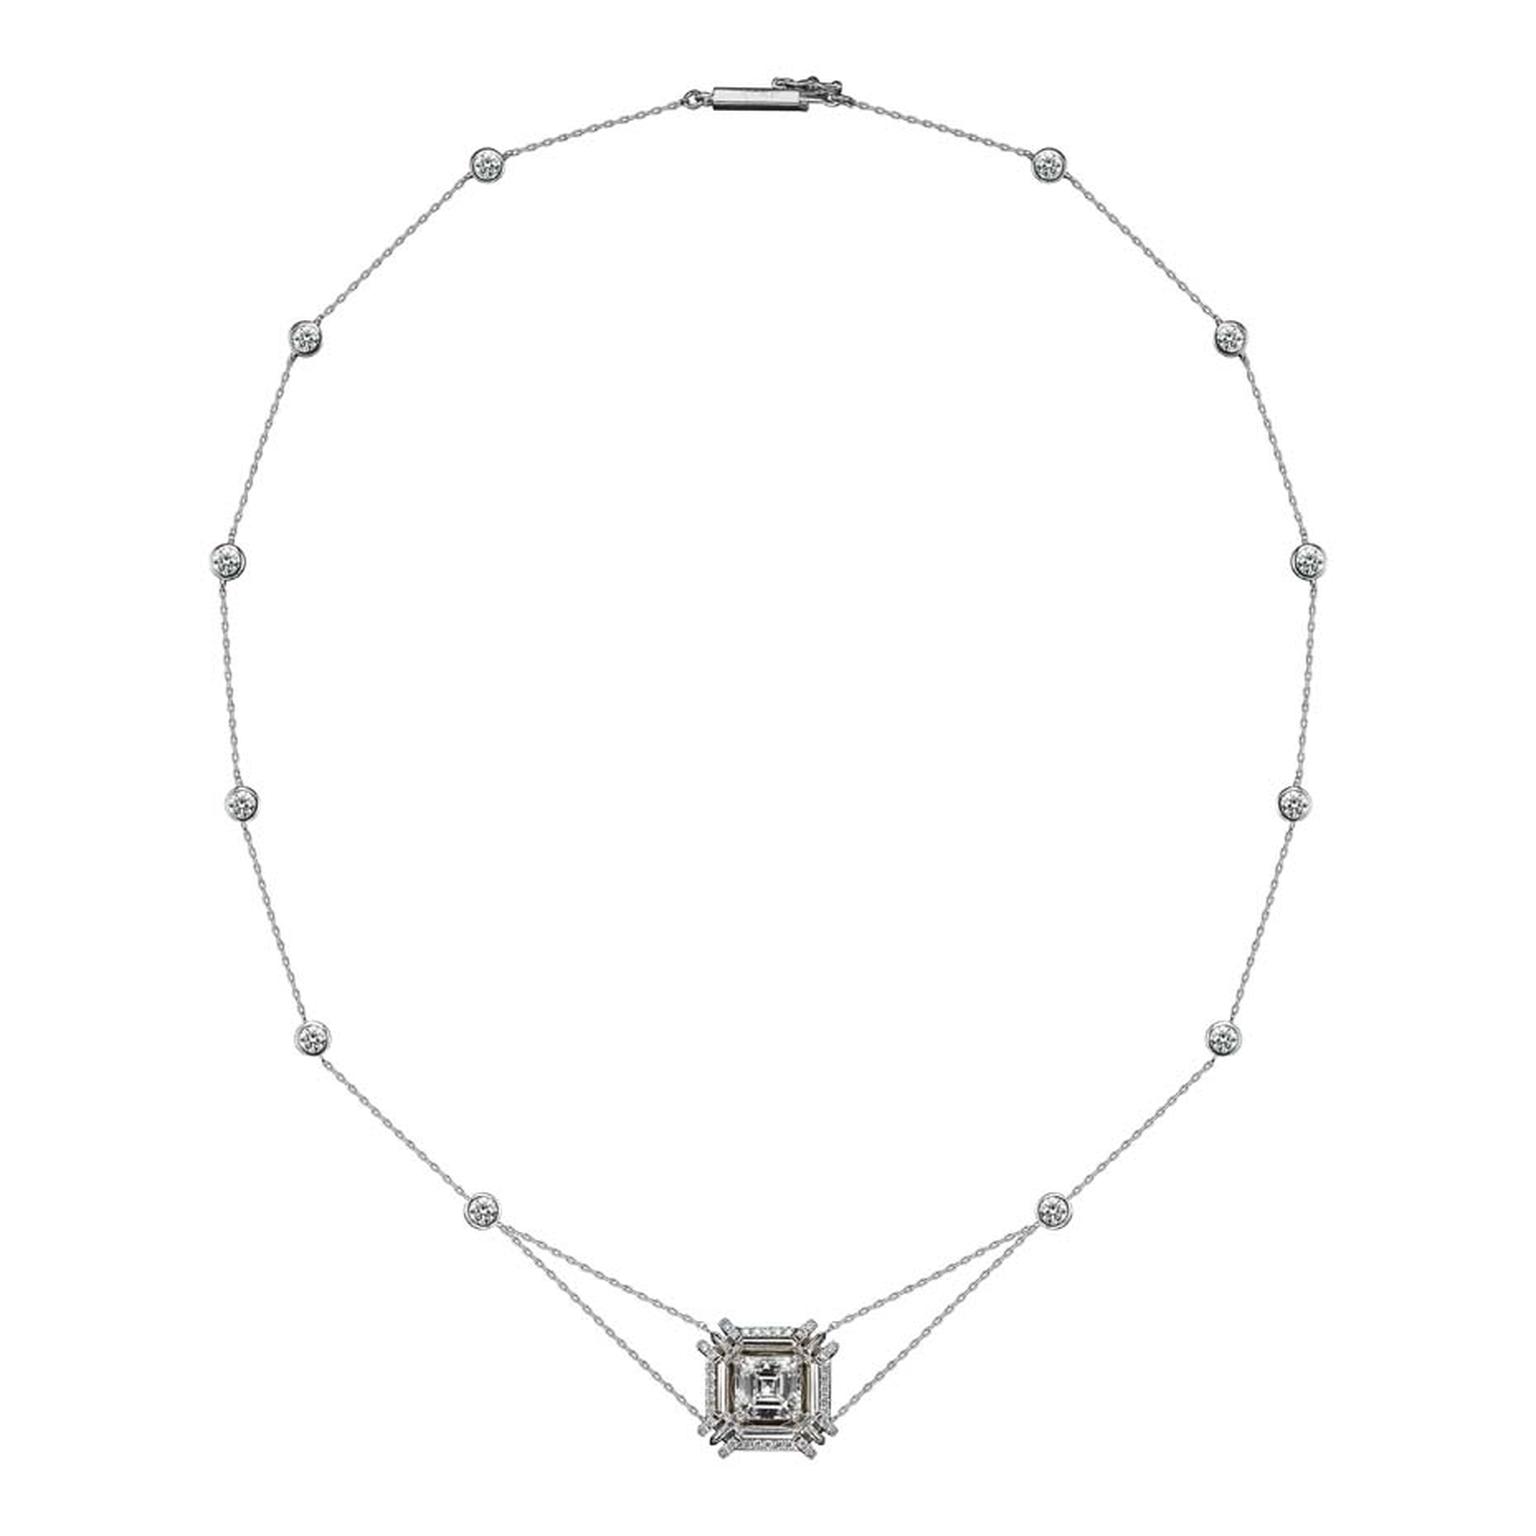 Limited edition necklace featuring 2.00ct Asscher-cut diamonds encircled with Alexandra Mor's signature